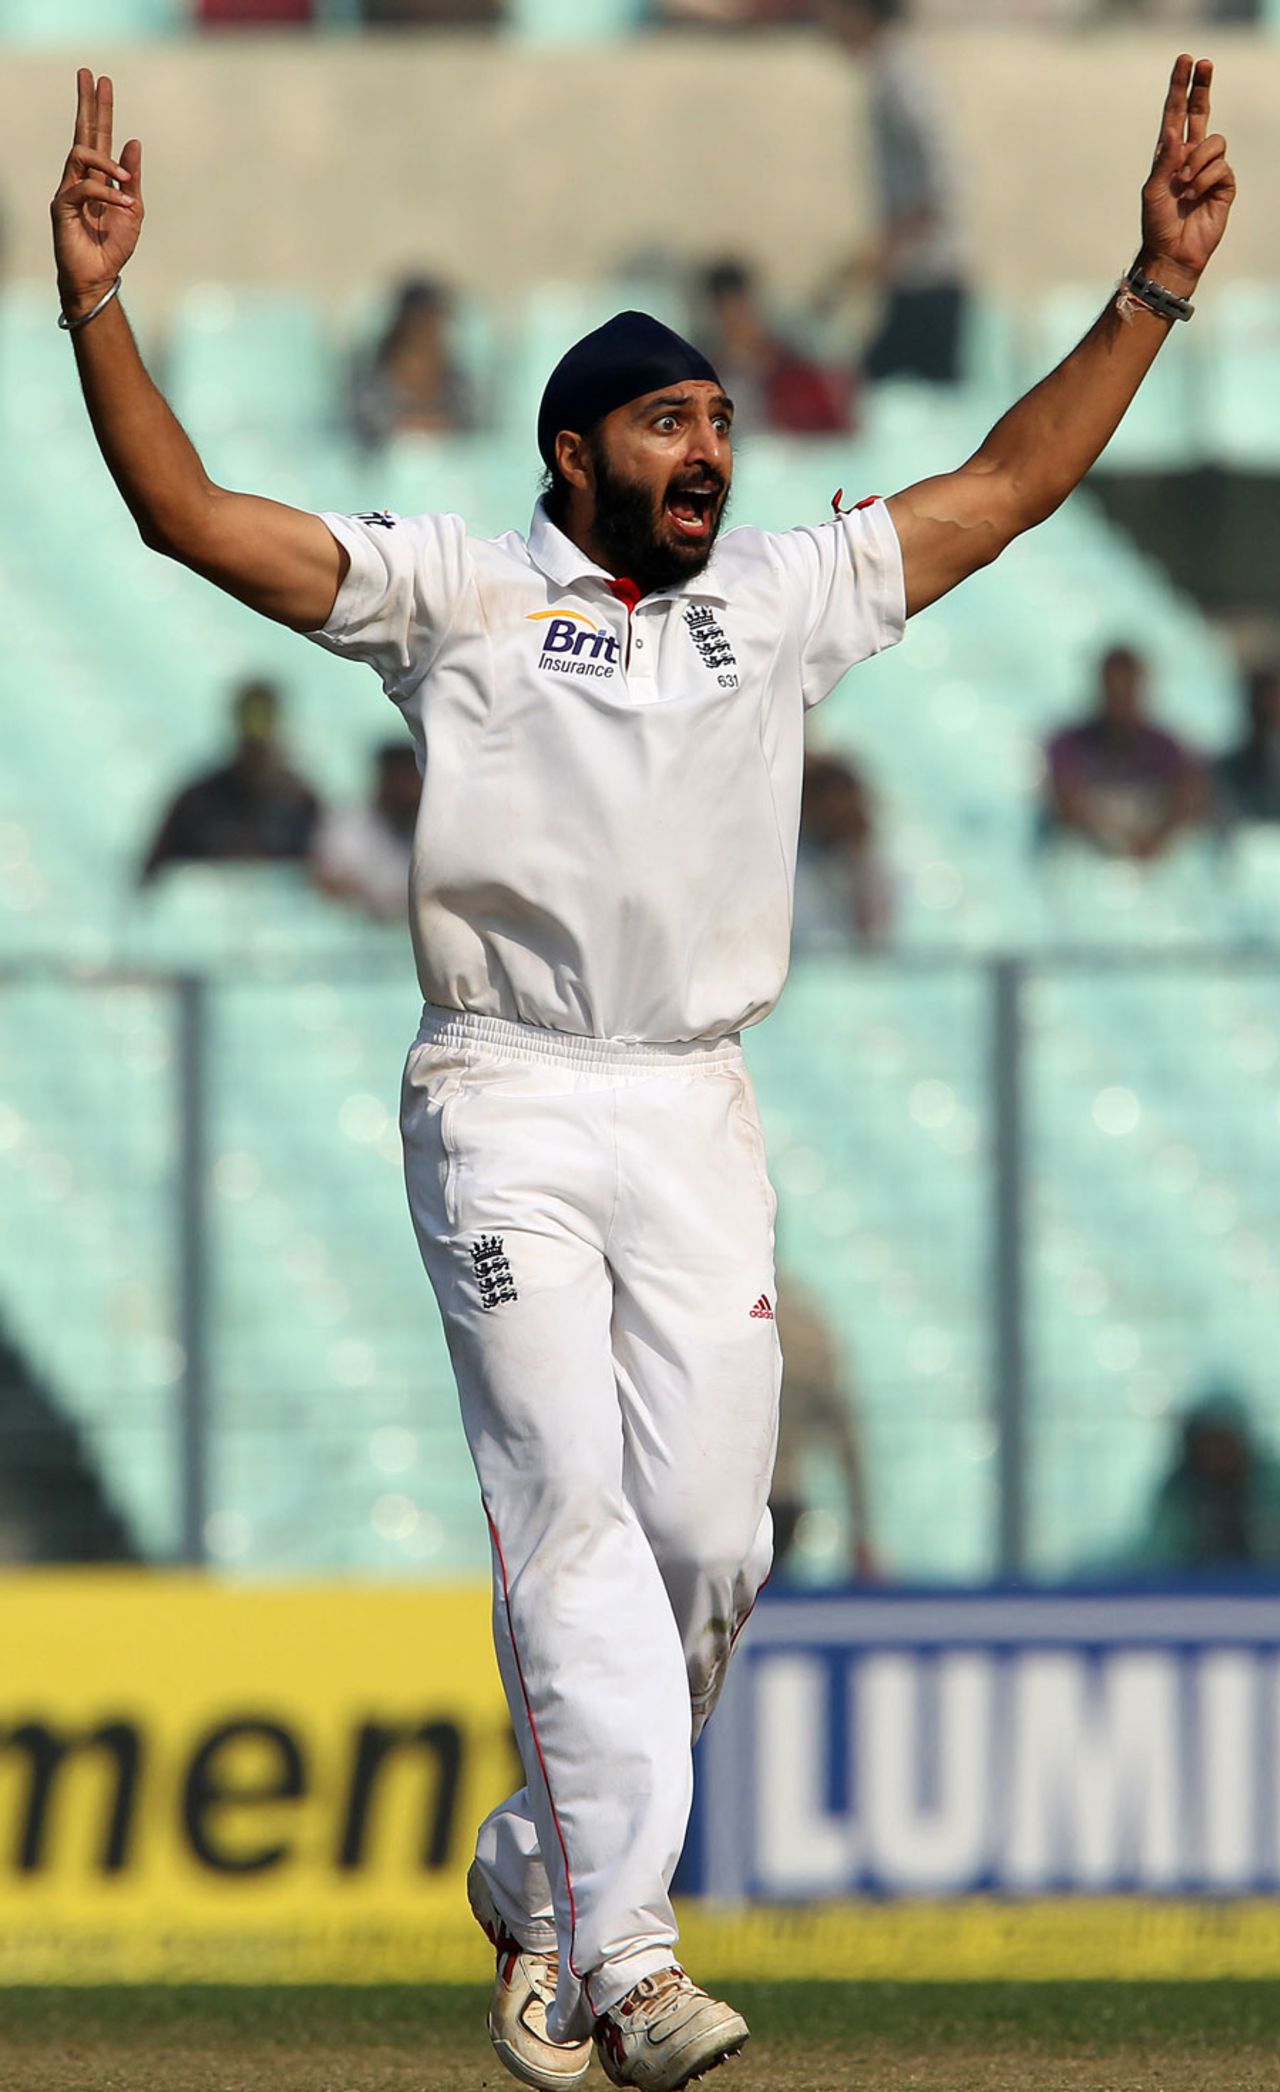 Monty Panesar appeals for a wicket, India v England, 3rd Test, Kolkata, 2nd day, December 6, 2012